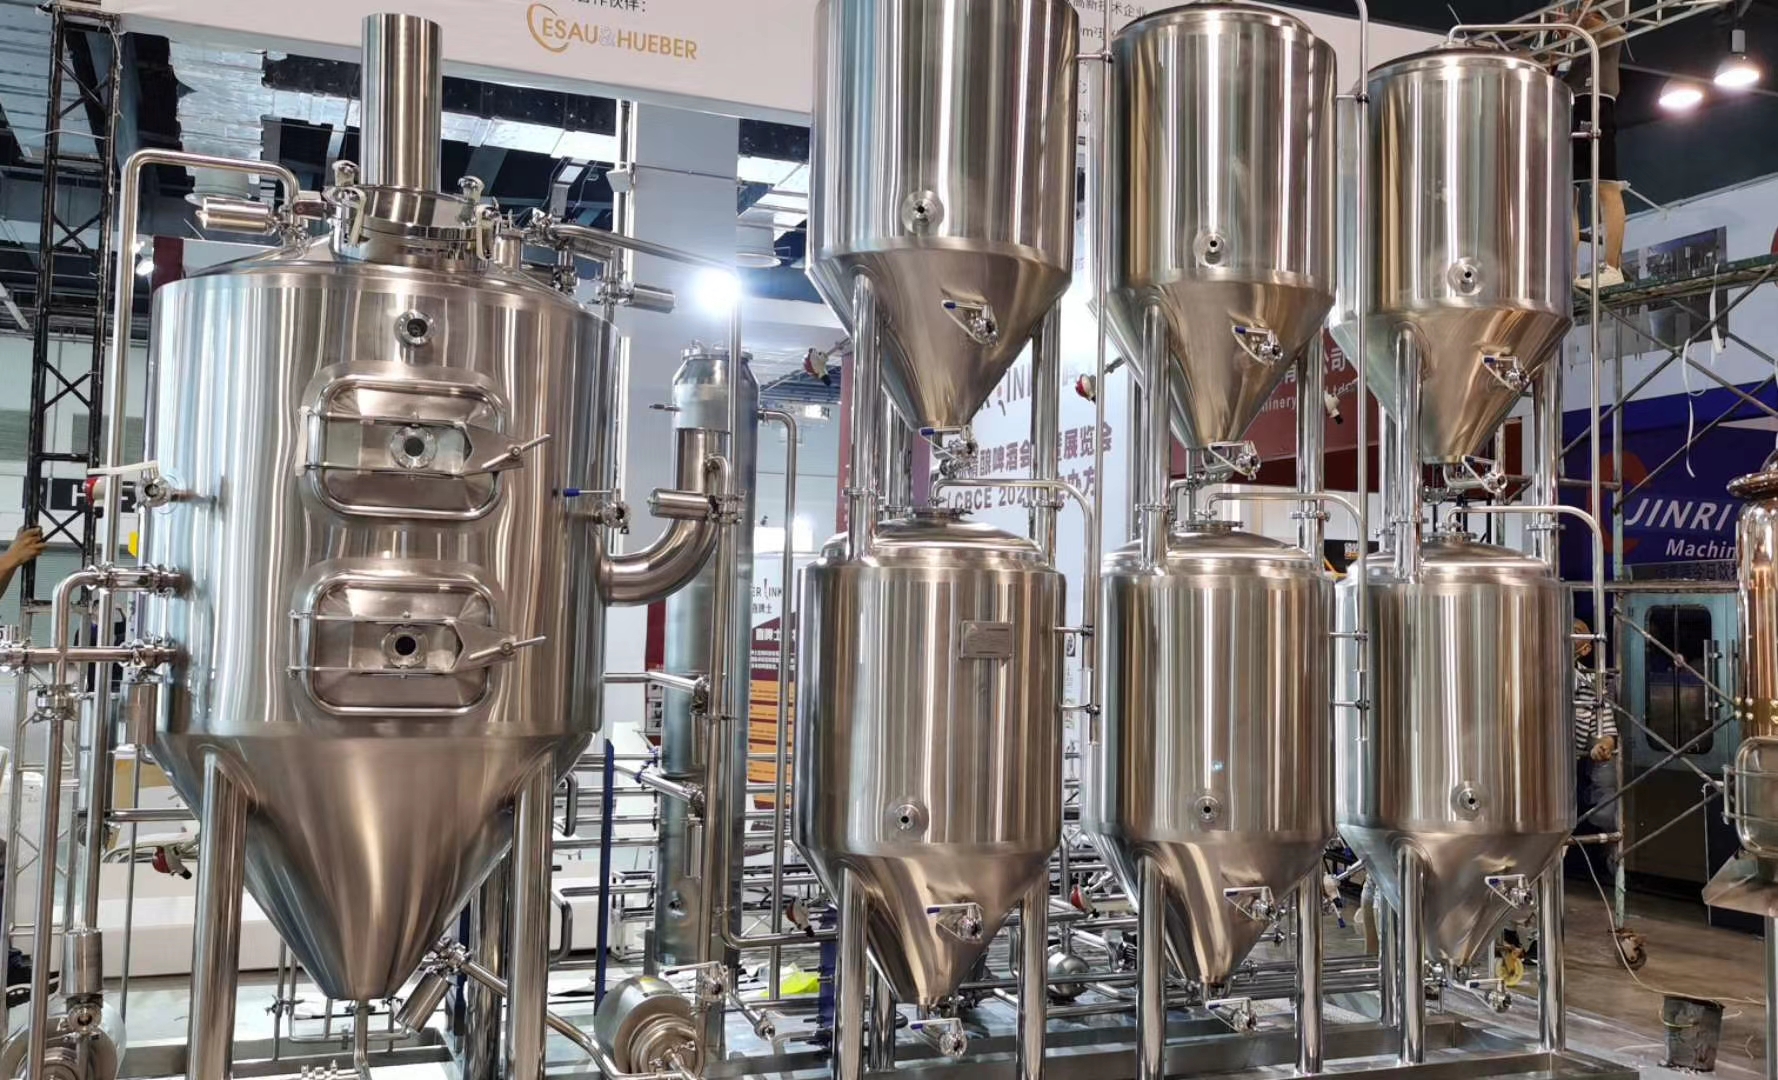 Norway professional craft beer brewing equipment of stainless steel from China manufacturers W1